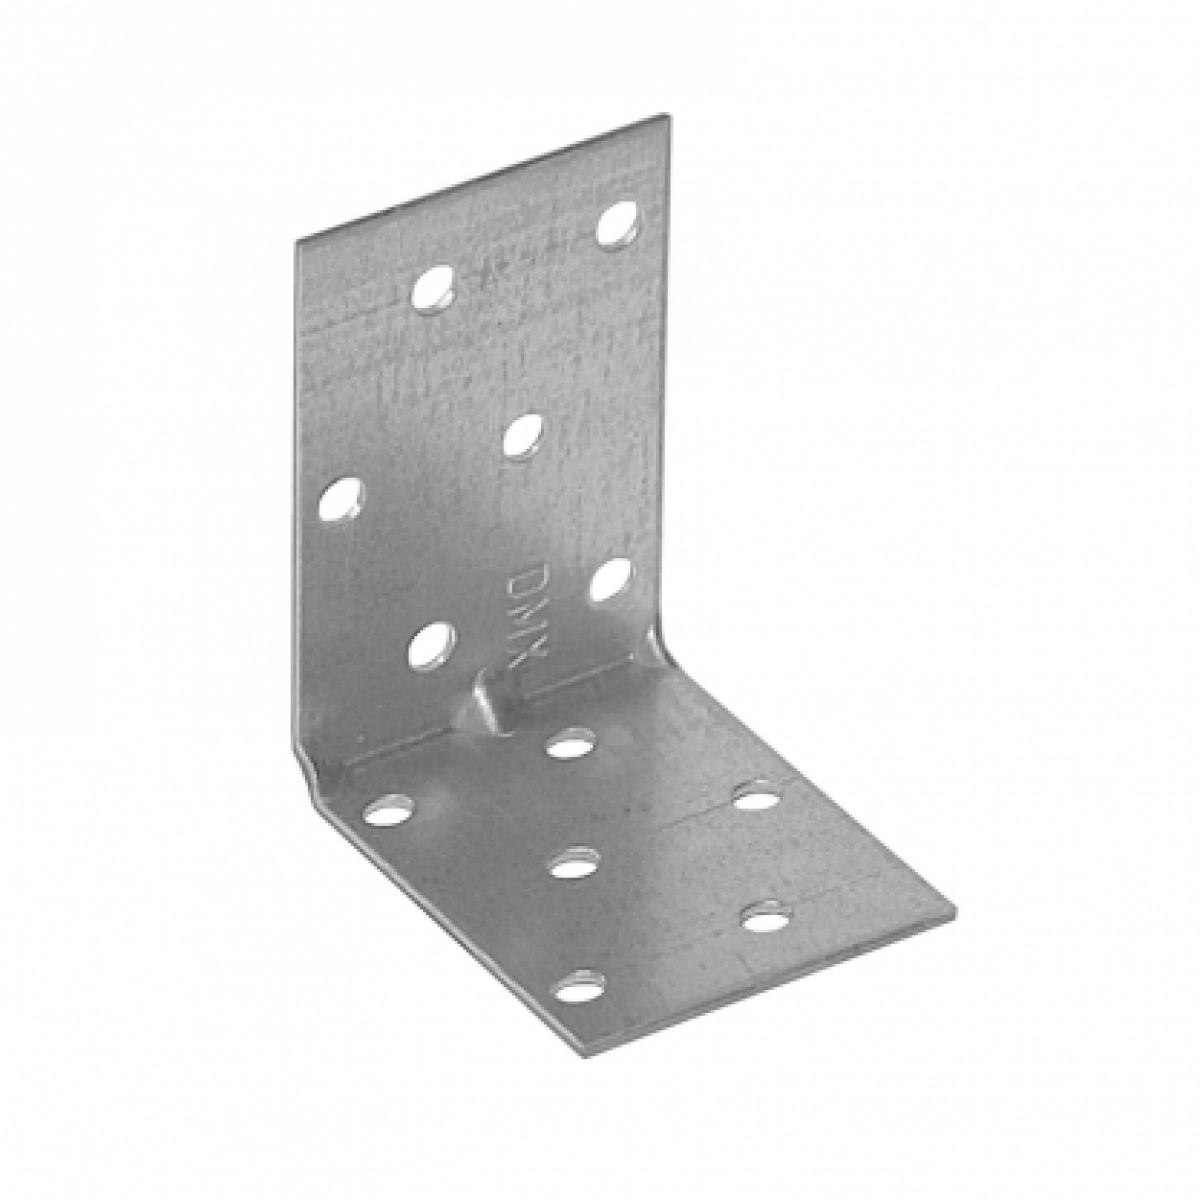 KMP – reinforced perforated angle bracket (1,5 mm)